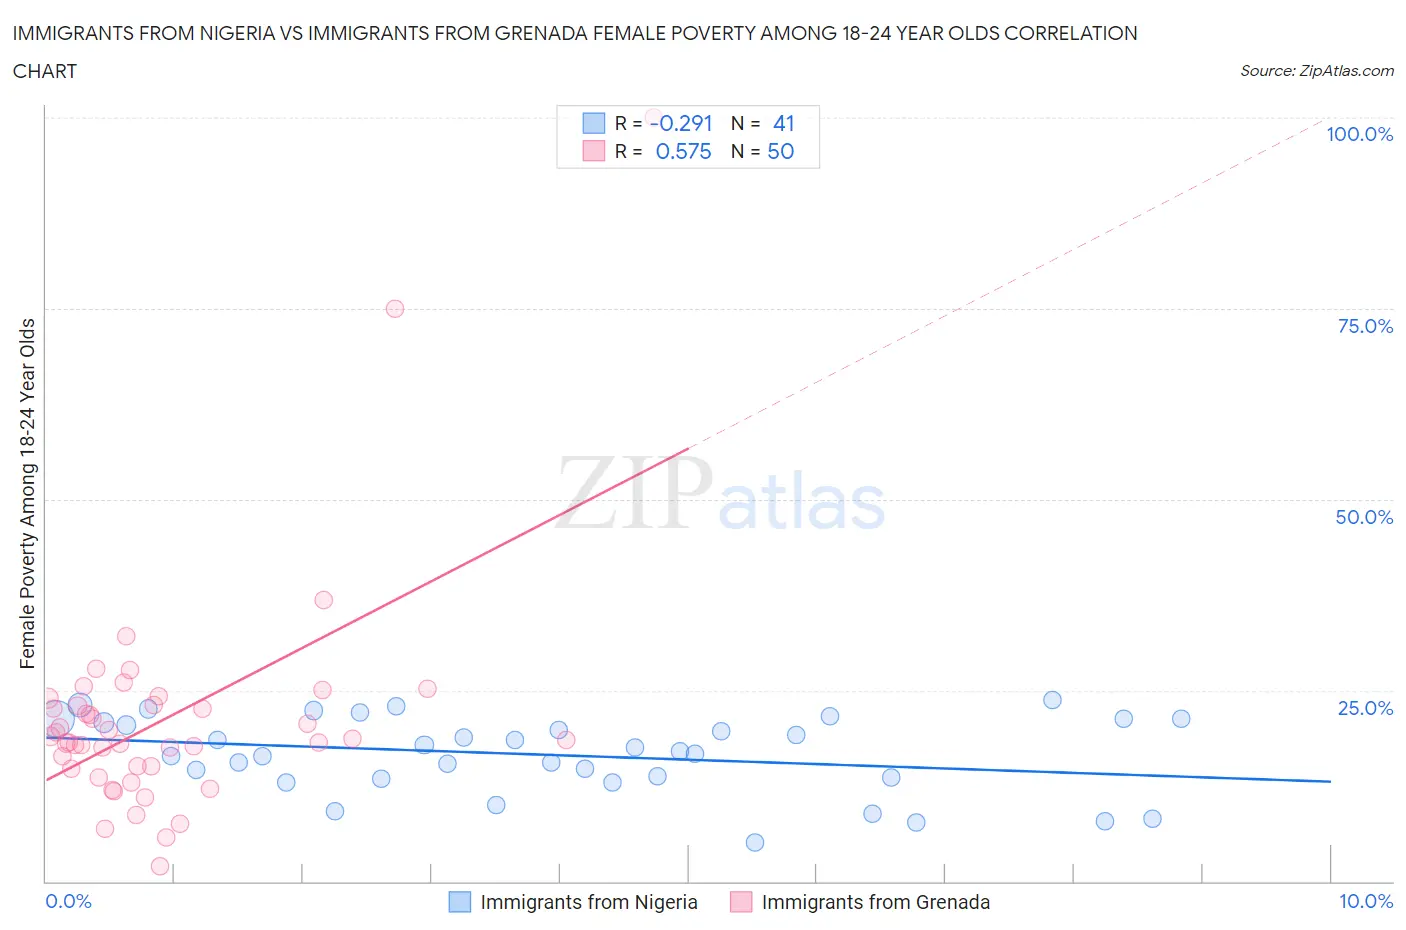 Immigrants from Nigeria vs Immigrants from Grenada Female Poverty Among 18-24 Year Olds